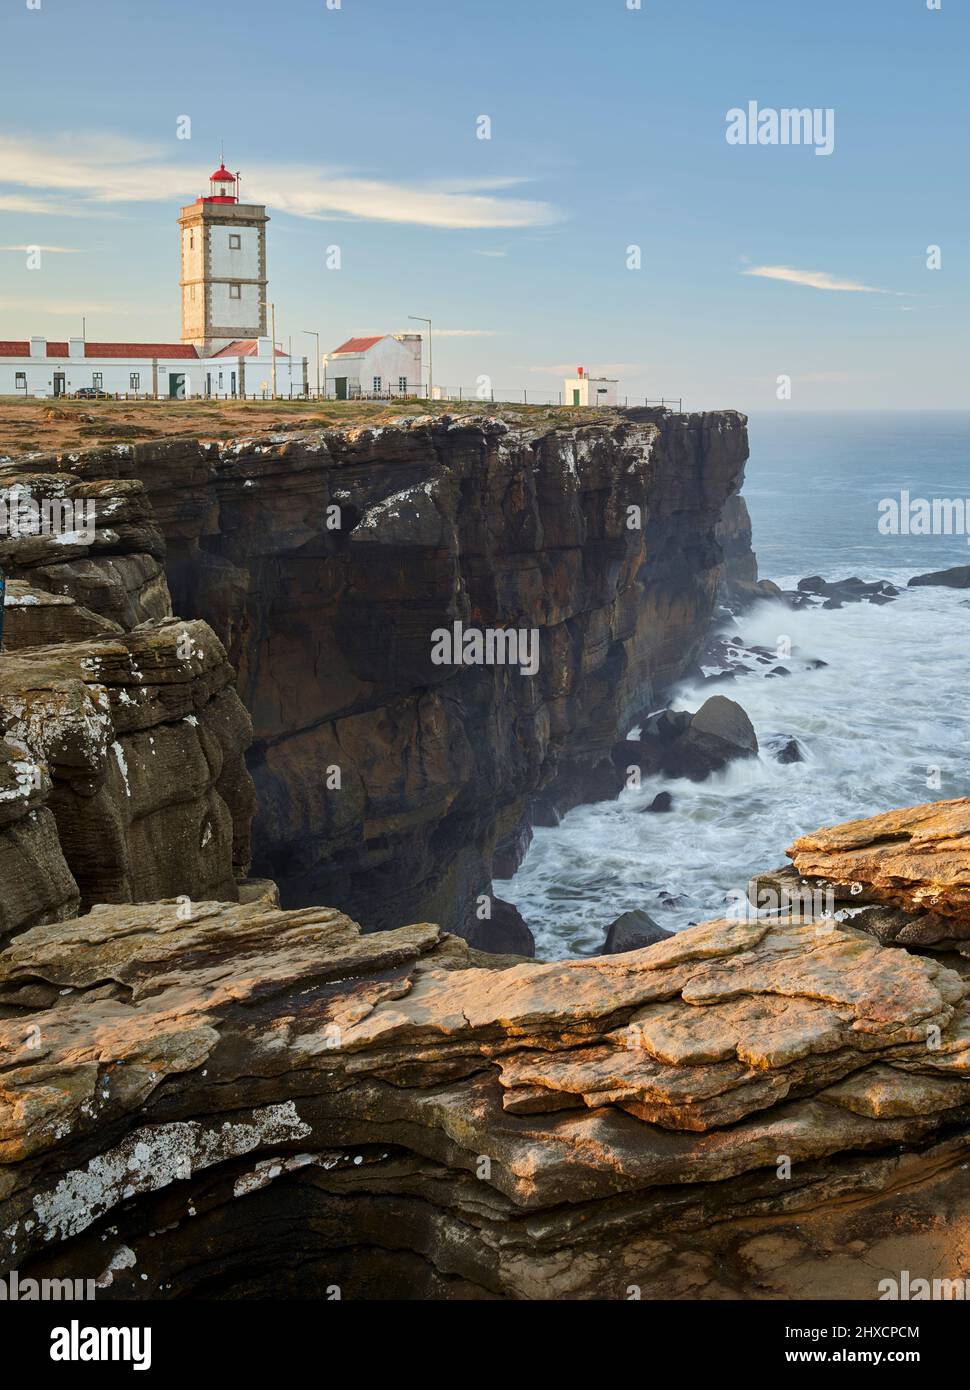 Lighthouse at Cabo Carvoeiro, Peniche, Portugal Stock Photo